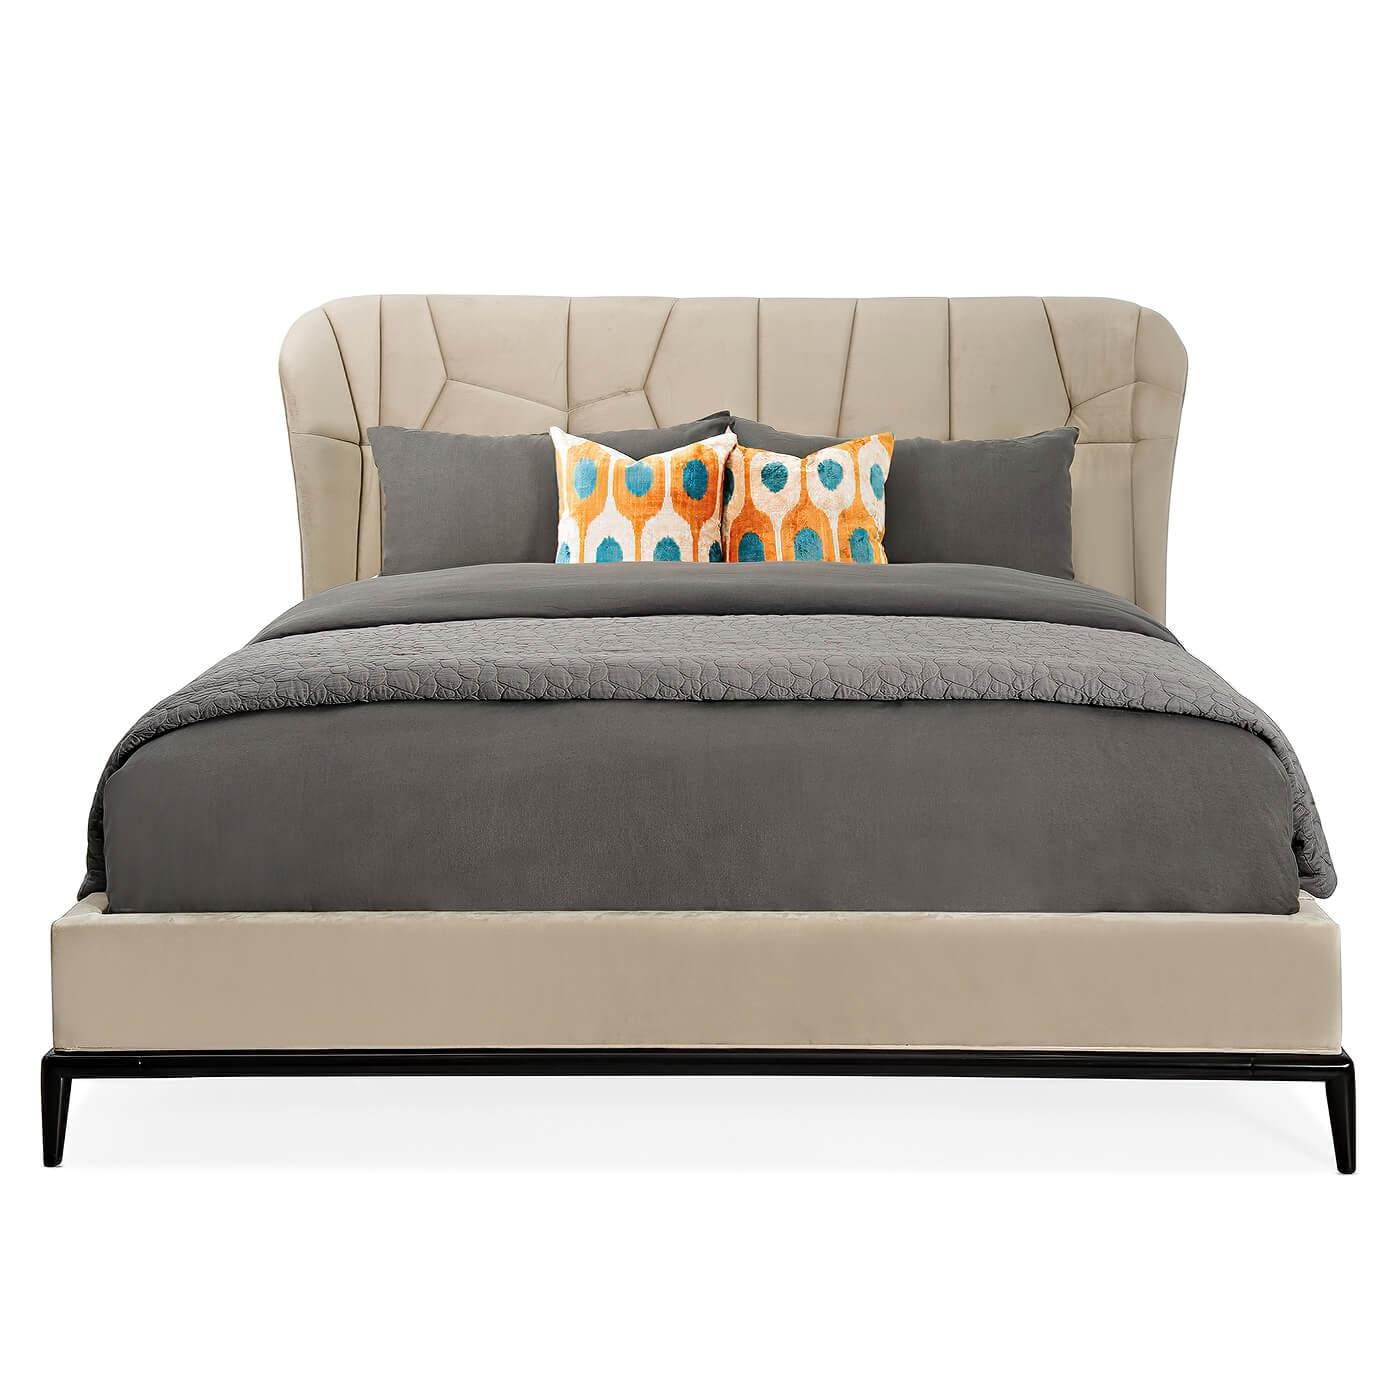 A modern classic upholstered king bed. Its bold design offers a refreshing interpretation of the wing bed and takes it to new heights with a sophisticated silhouette and custom geometric quilting. The uniquely stitched headboard features wings that